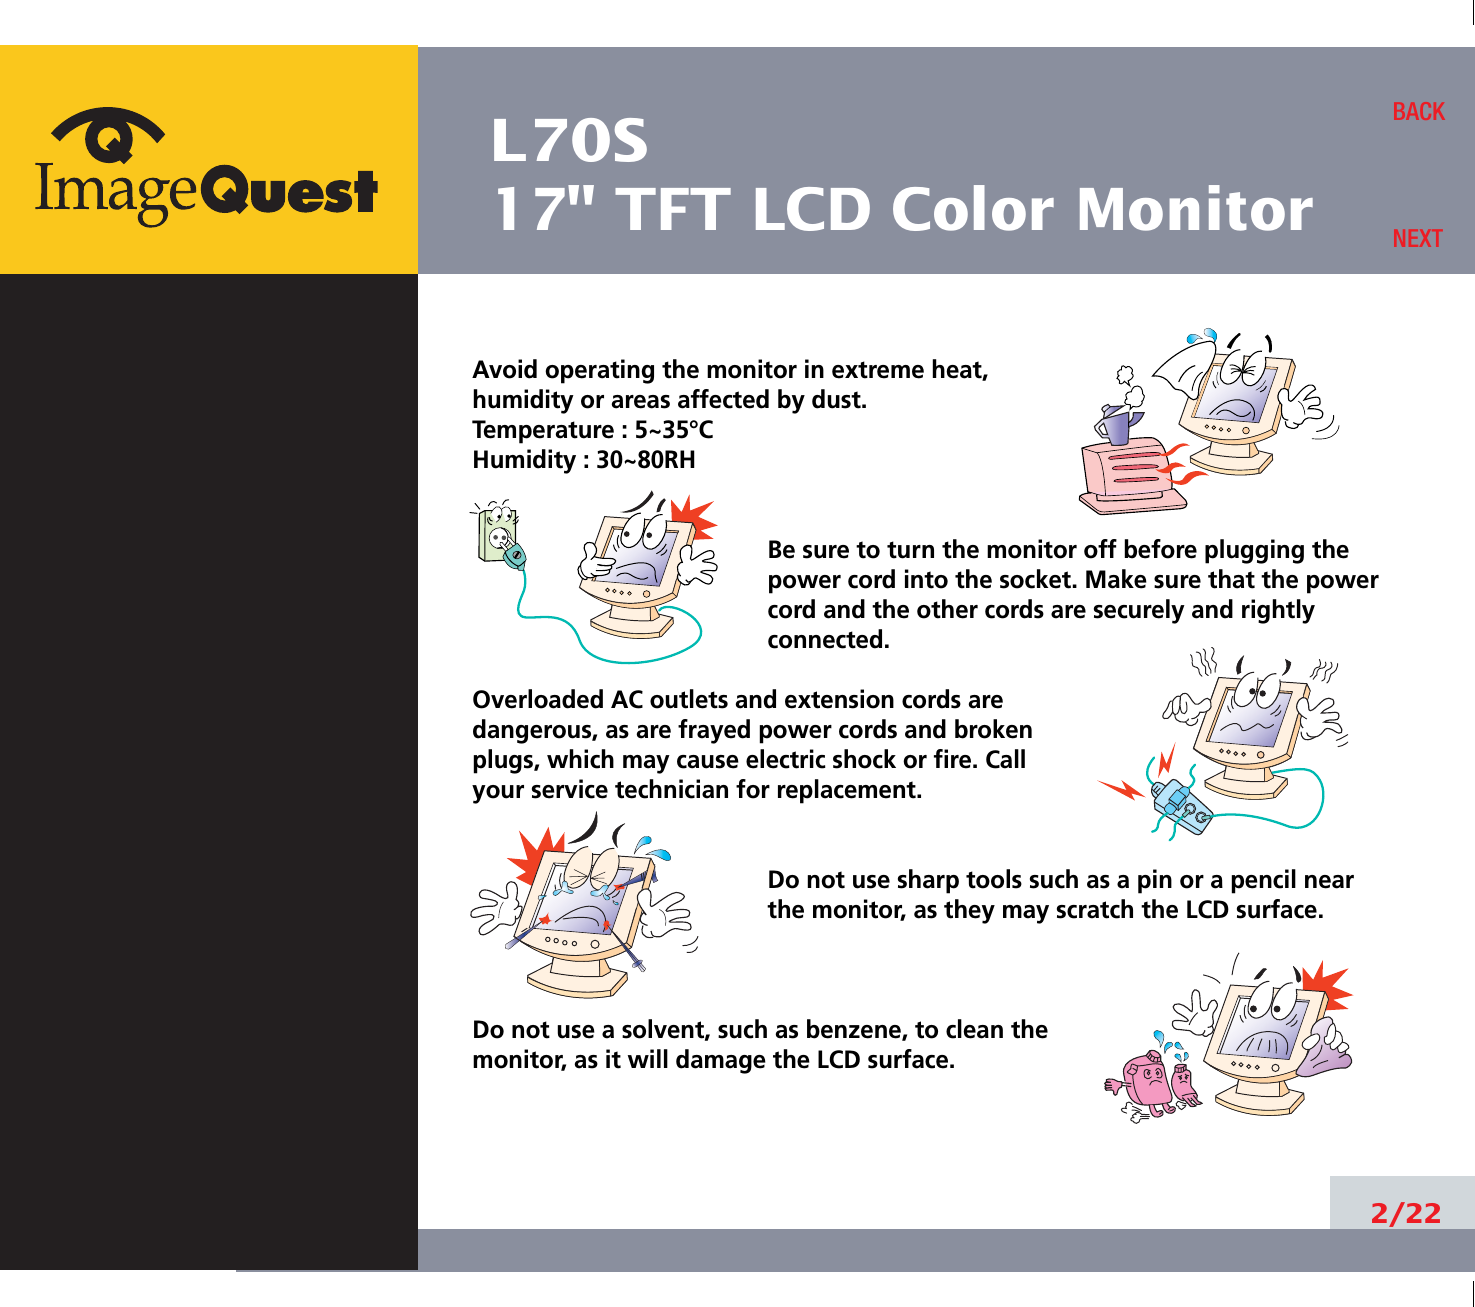 L70S17&quot; TFT LCD Color Monitor2/22BACKNEXTAvoid operating the monitor in extreme heat, humidity or areas affected by dust. Temperature : 5~35°CHumidity : 30~80RH Be sure to turn the monitor off before plugging thepower cord into the socket. Make sure that the powercord and the other cords are securely and rightlyconnected.Overloaded AC outlets and extension cords are dangerous, as are frayed power cords and broken plugs, which may cause electric shock or fire. Call your service technician for replacement.Do not use sharp tools such as a pin or a pencil near the monitor, as they may scratch the LCD surface.Do not use a solvent, such as benzene, to clean the monitor, as it will damage the LCD surface.